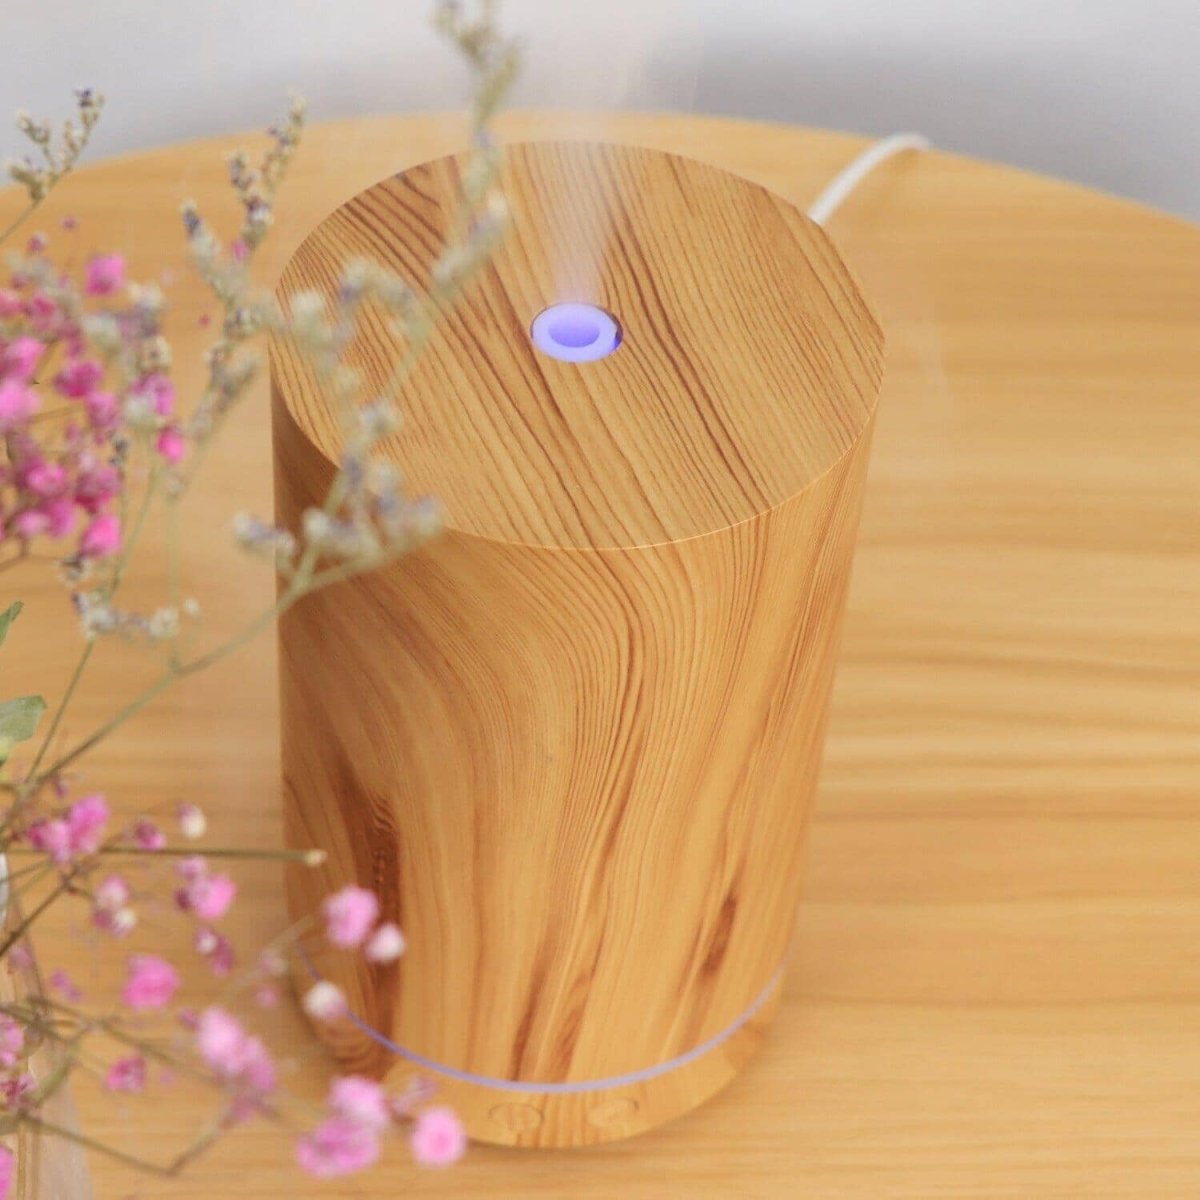 An eco-friendly-wood humidifier on a wooden surface